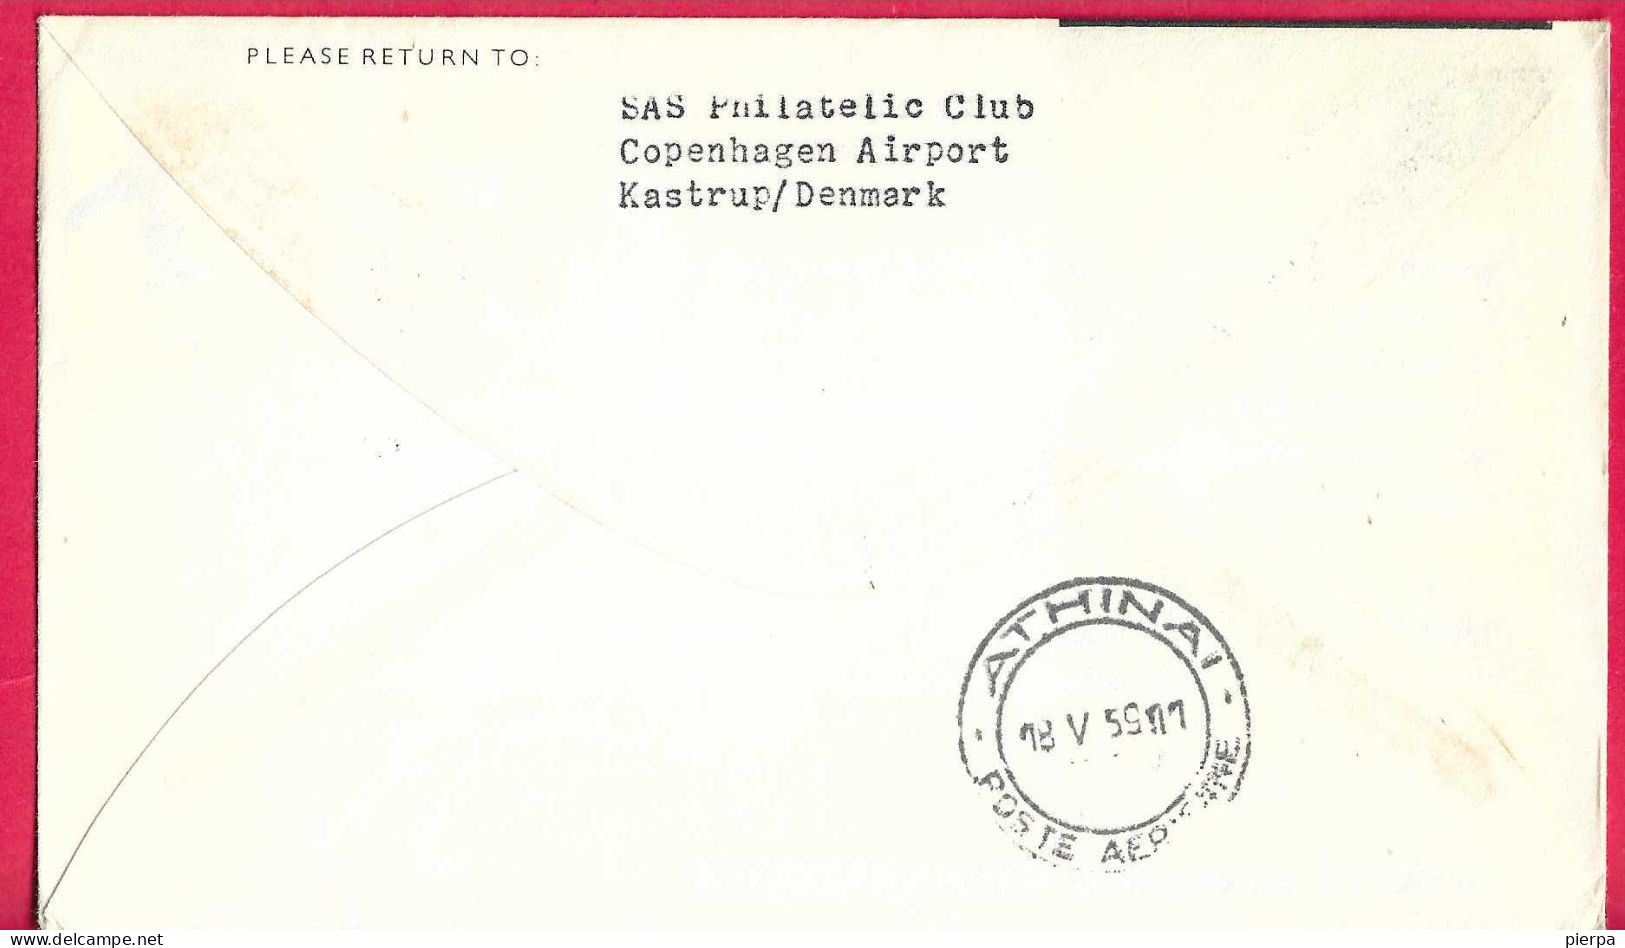 DANMARK - FIRST CARAVELLE FLIGHT - SAS - FROM KOBENHAVN TO ATHENS *17.5.59* ON OFFICIAL COVER - Poste Aérienne